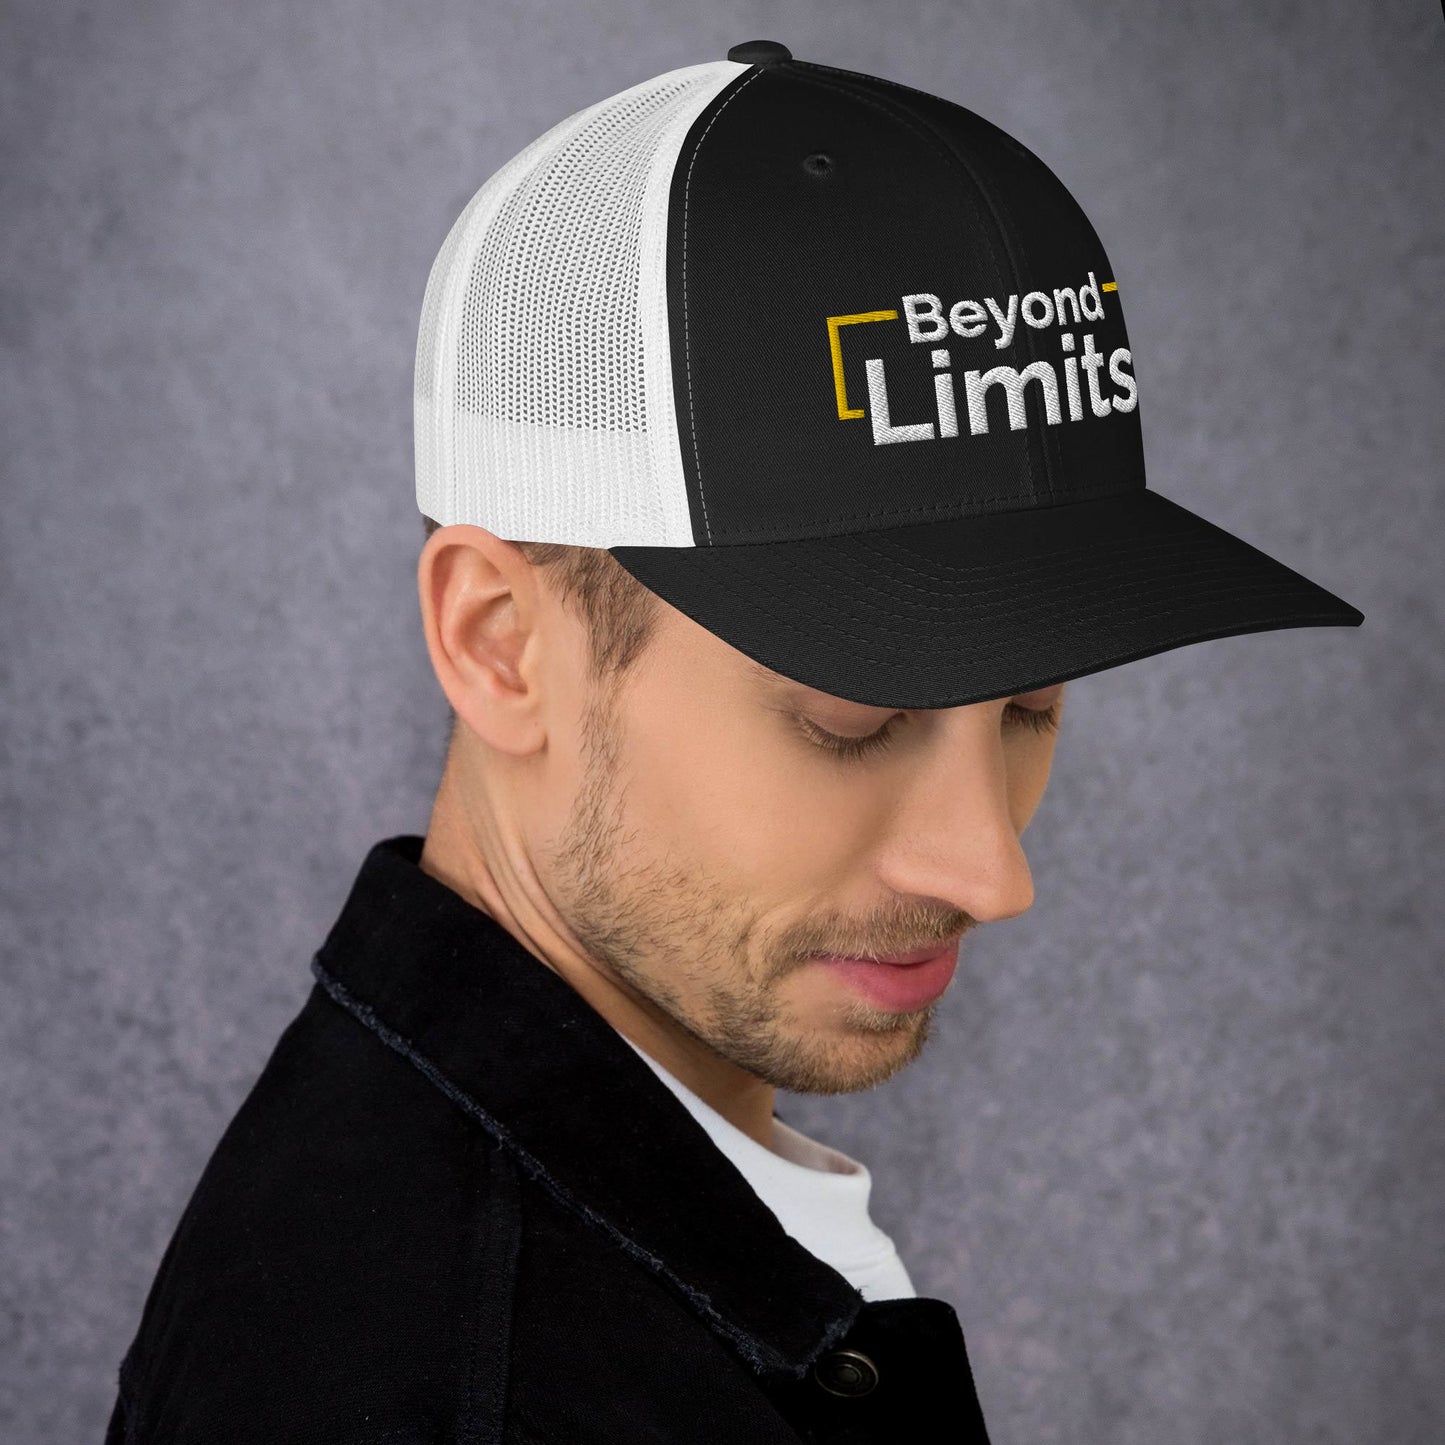 Beyond Limits: Classic Six-Panel Trucker Cap with Mesh Back